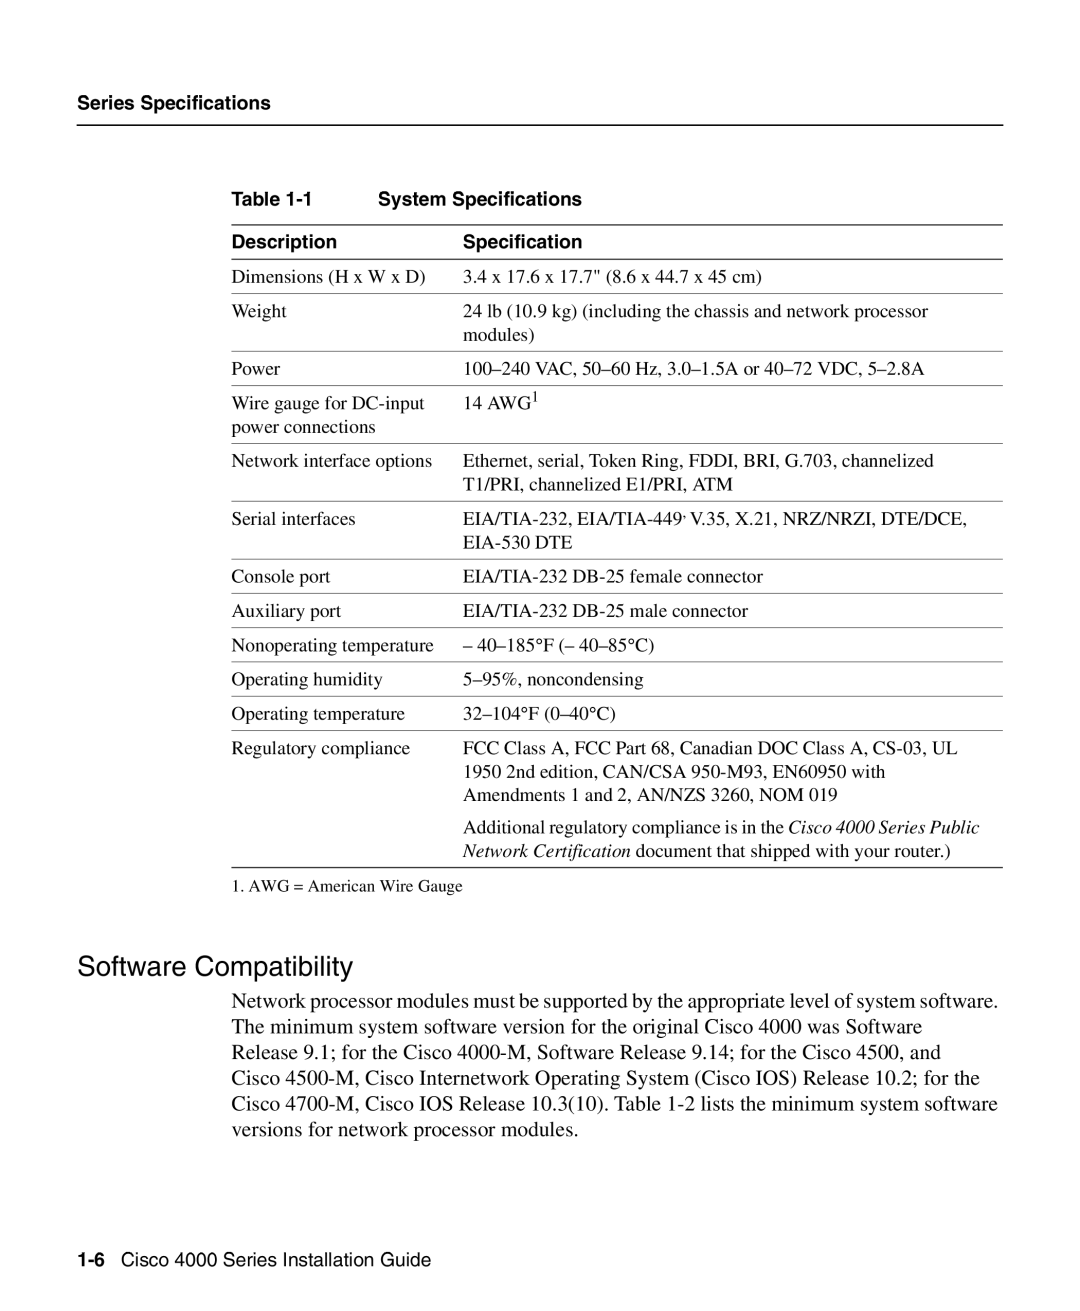 Cisco Systems 4000 manual Software Compatibility, Series Specifications, System Specifications, Description 